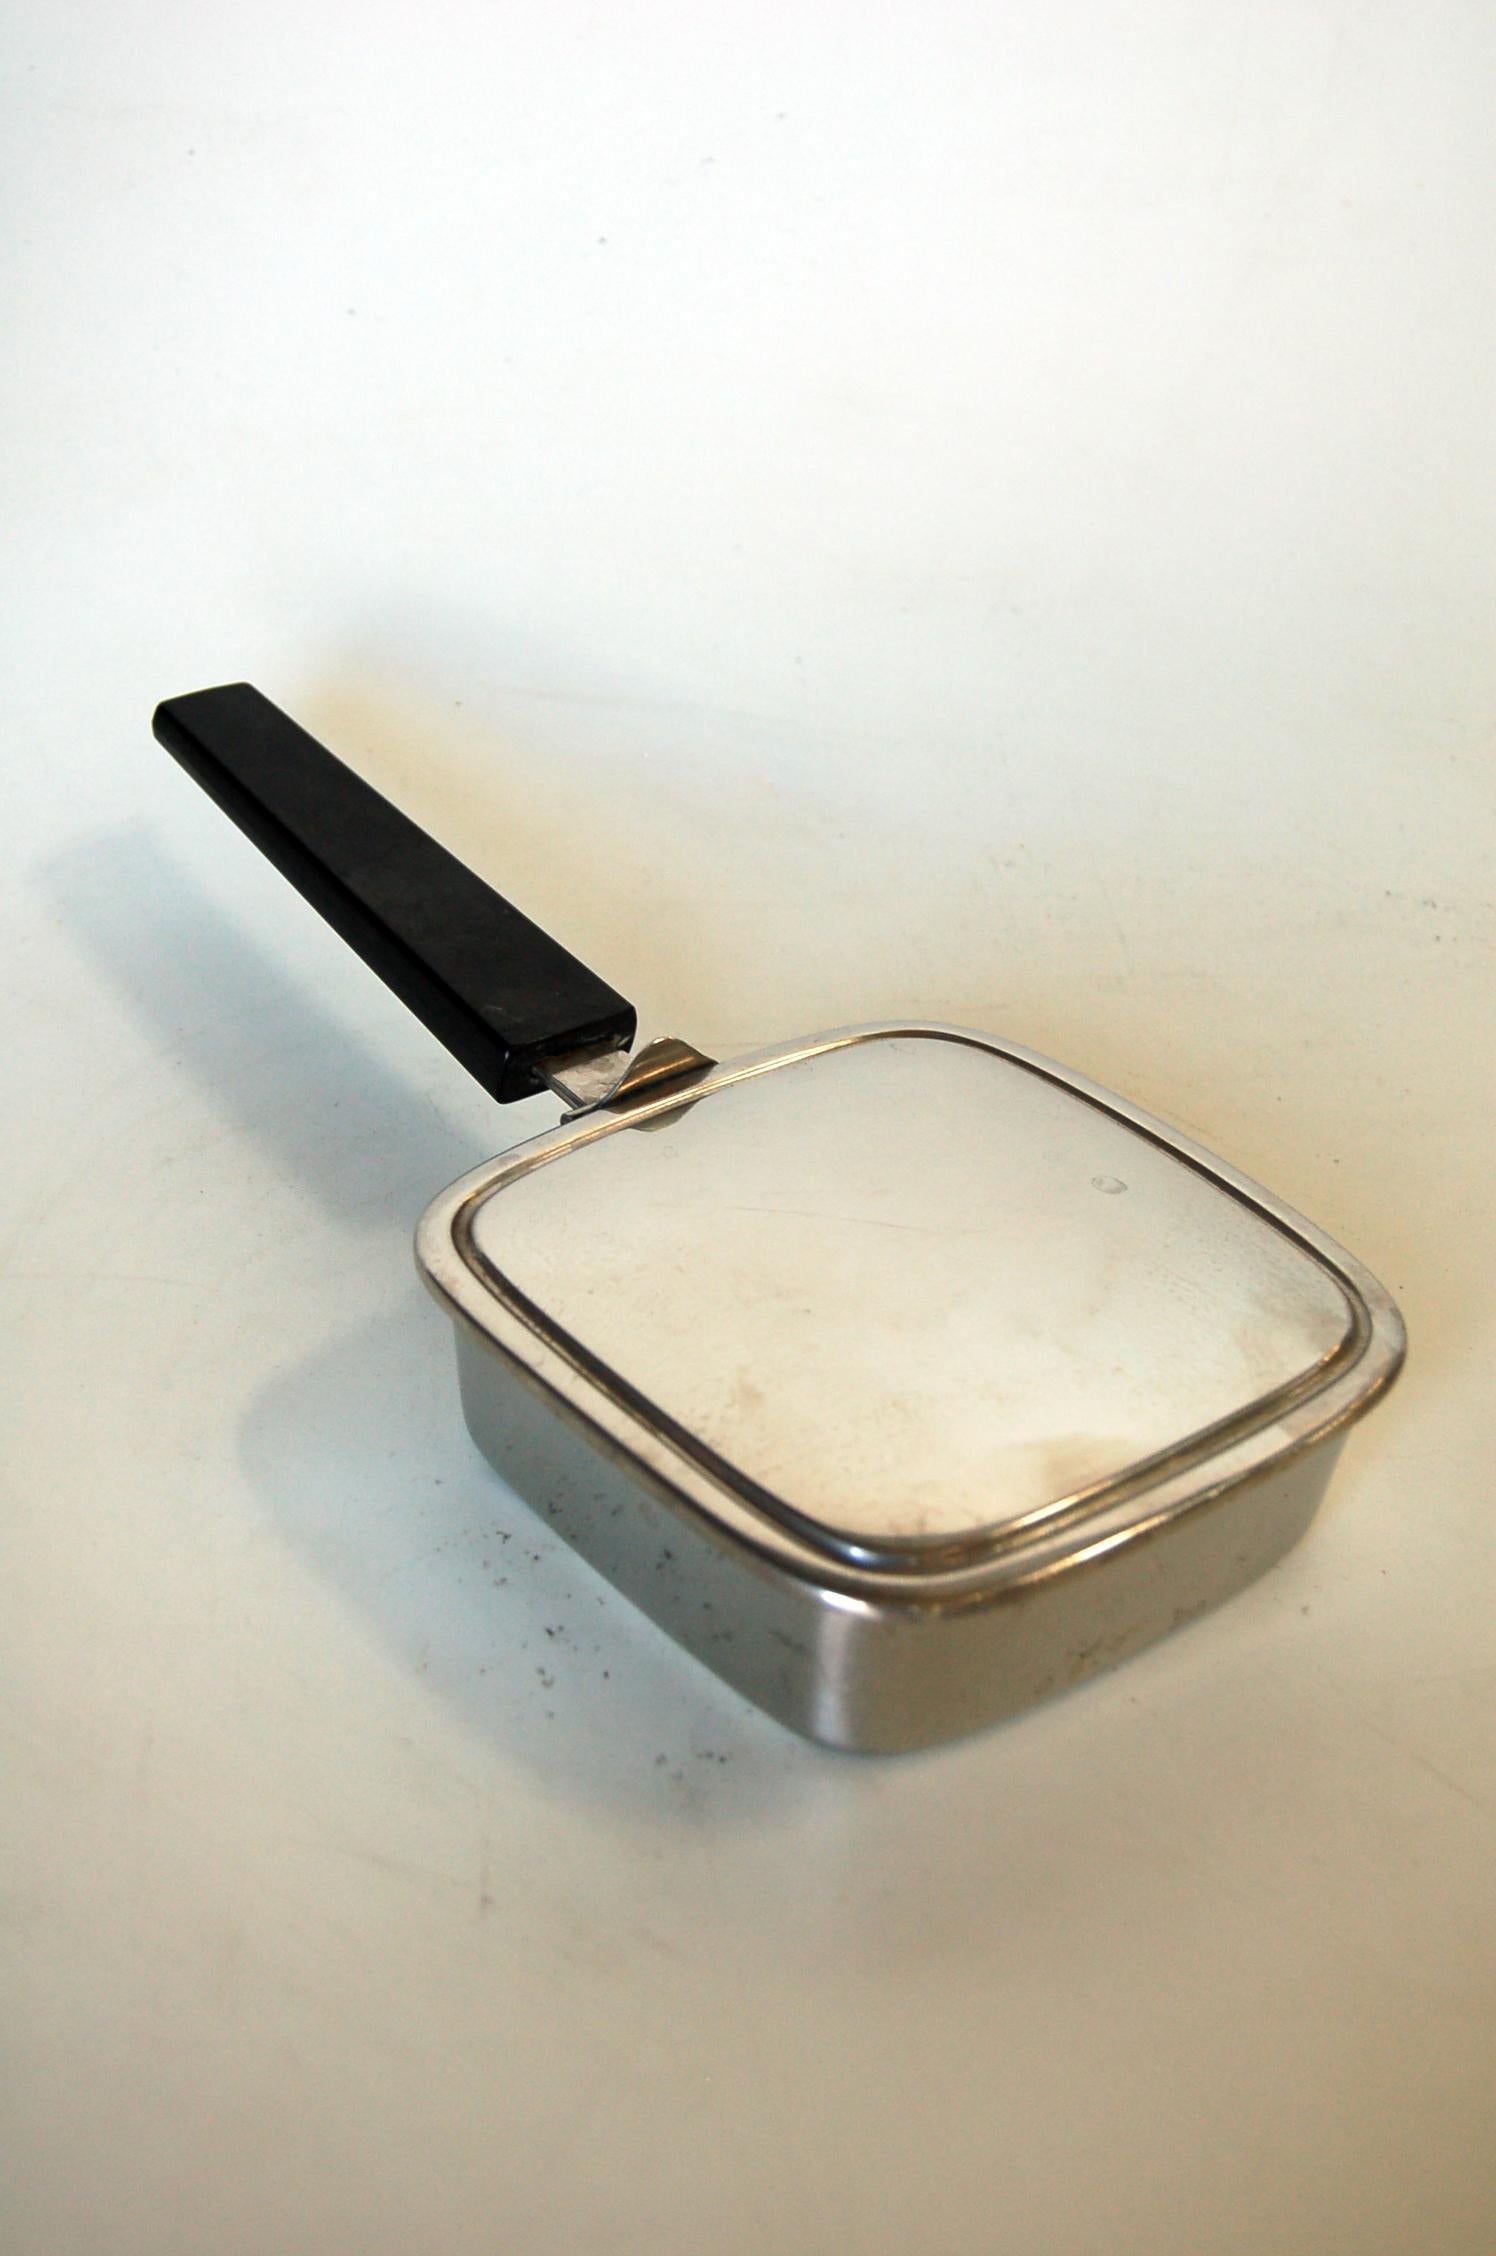 Stainless steel hinged crumb catcher / ashtray butler with Bakelite handle. Made in Sweden. 

Measures: 1.5